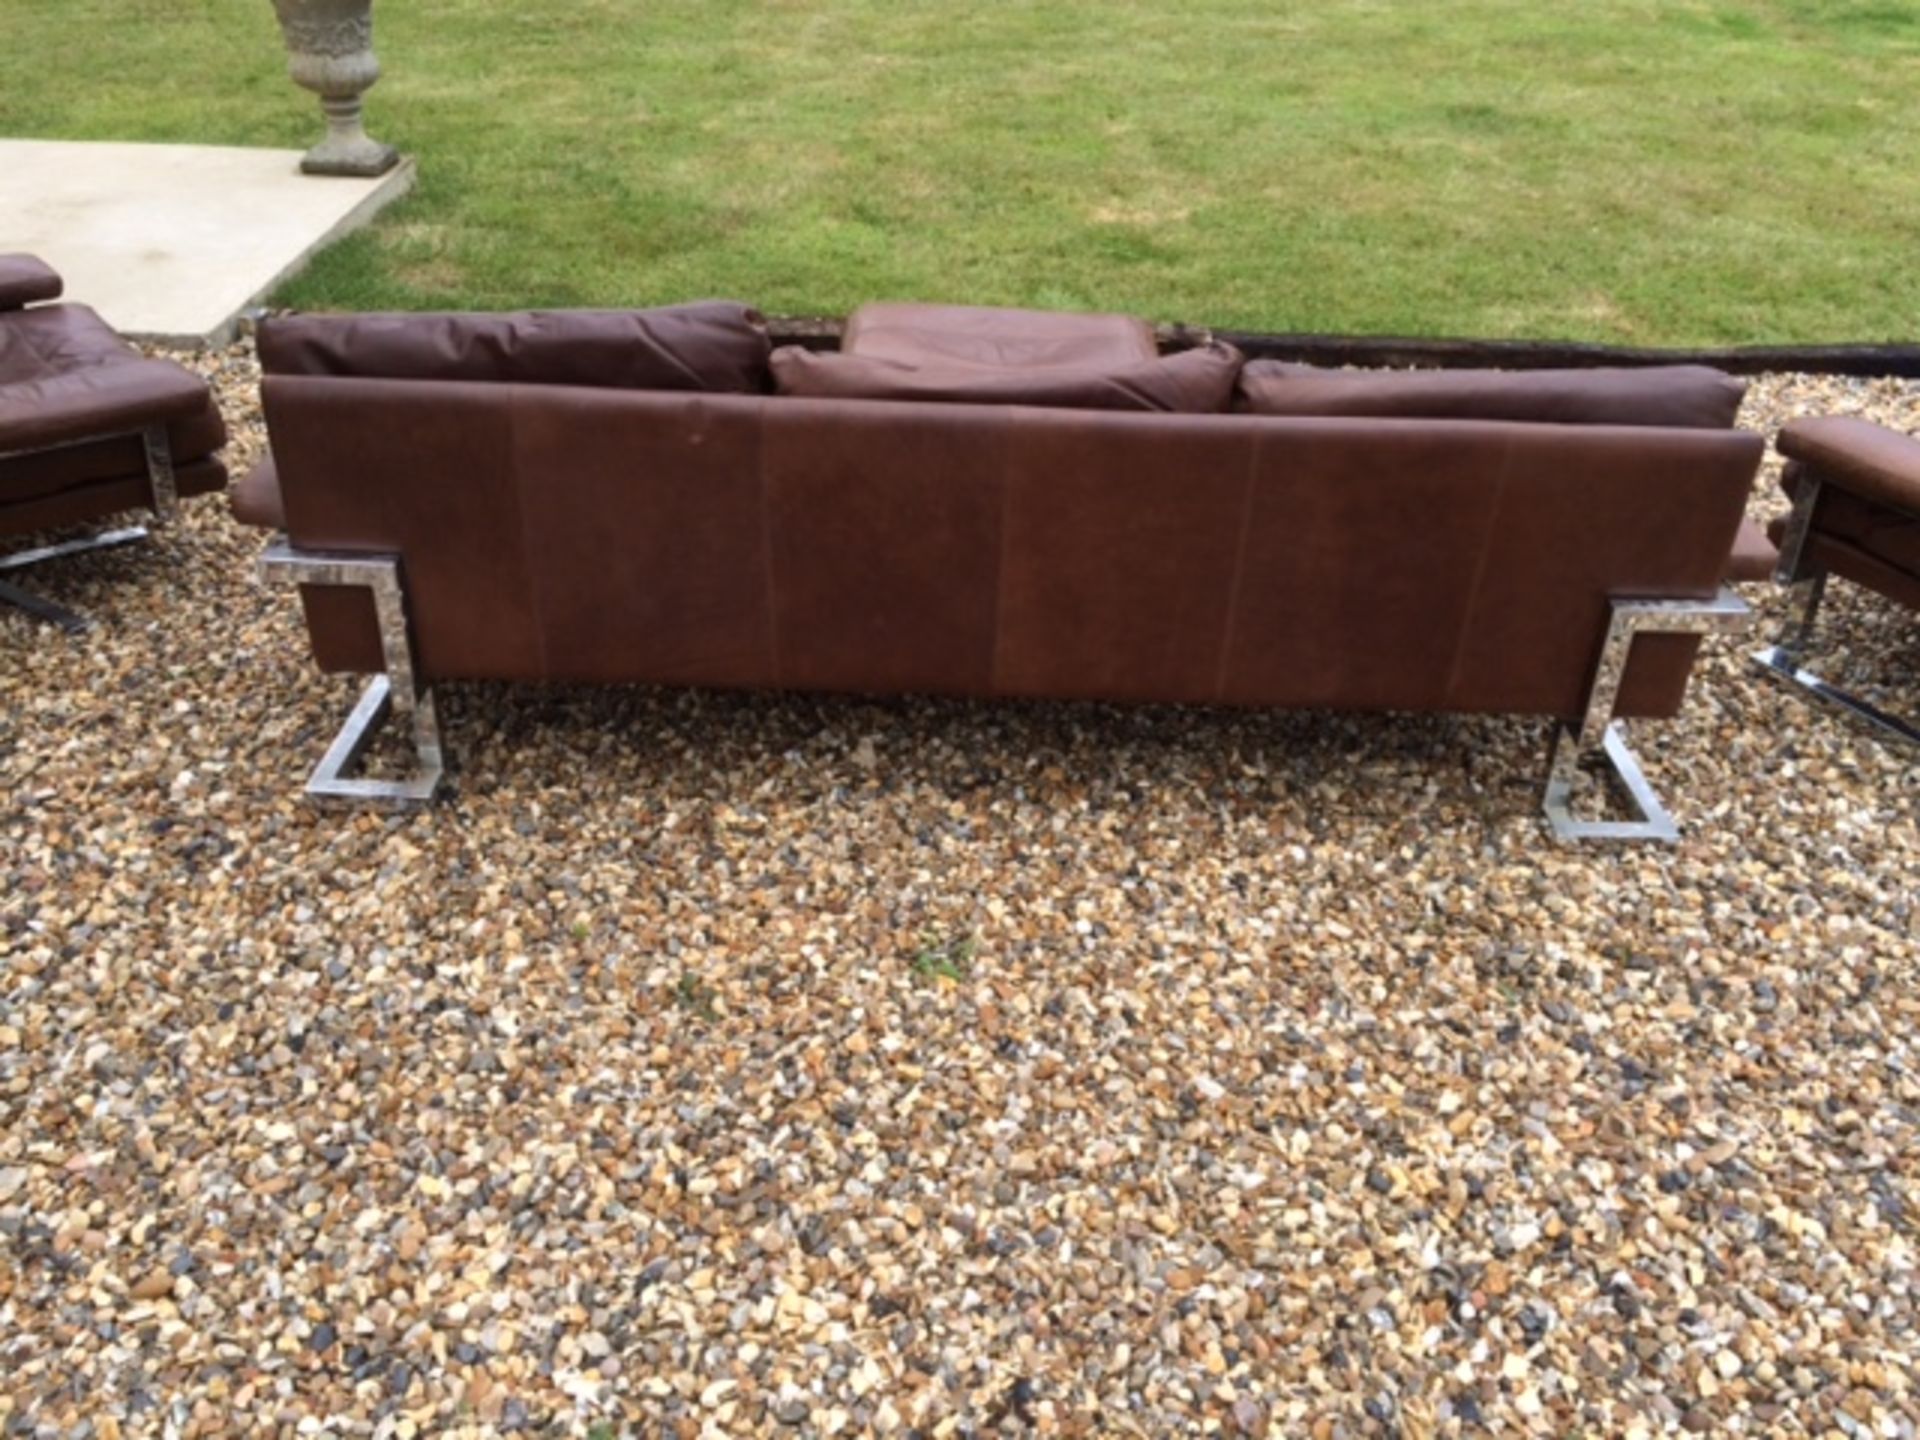 Rare Pieff vintage retro 70s brown leather 3 seater sofa, 2 seater sofa, chair and stool. - Image 4 of 8